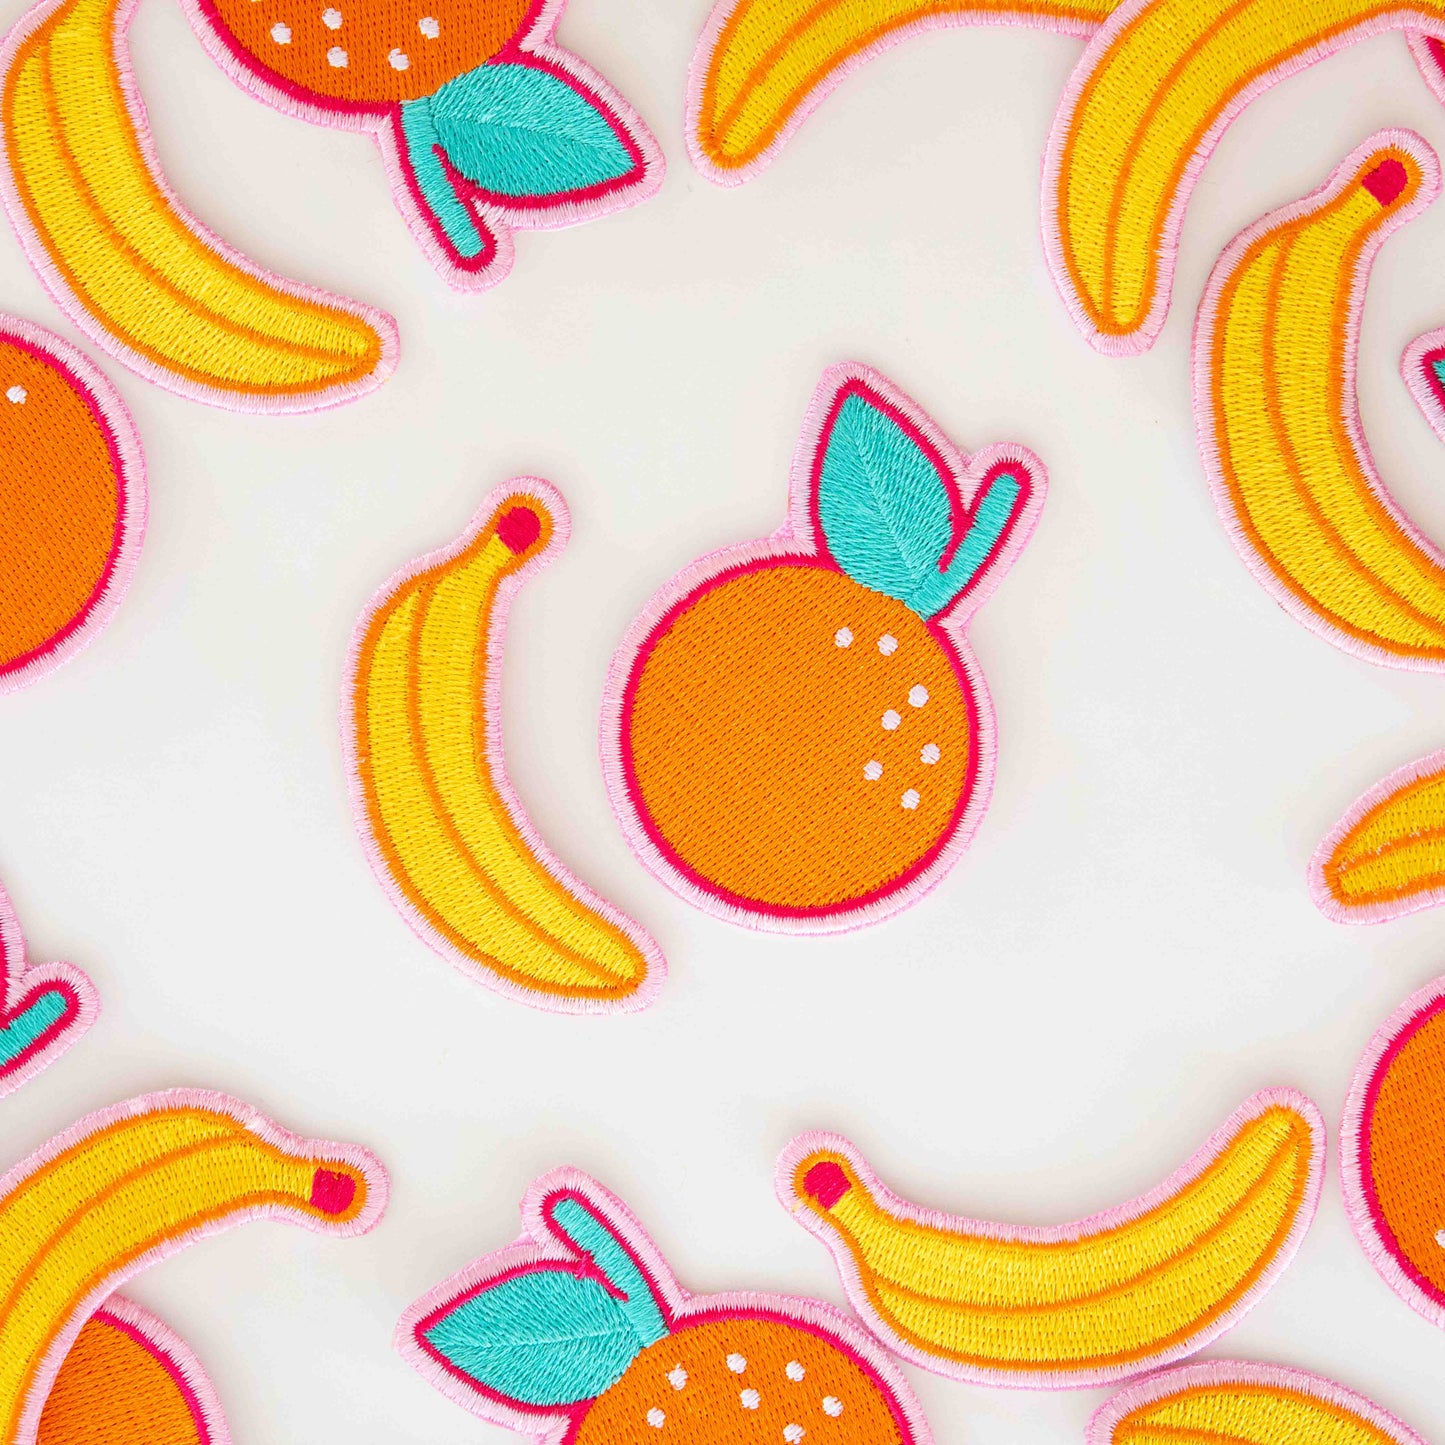 Banana and Orange Embroidered Patches - 2 Pack